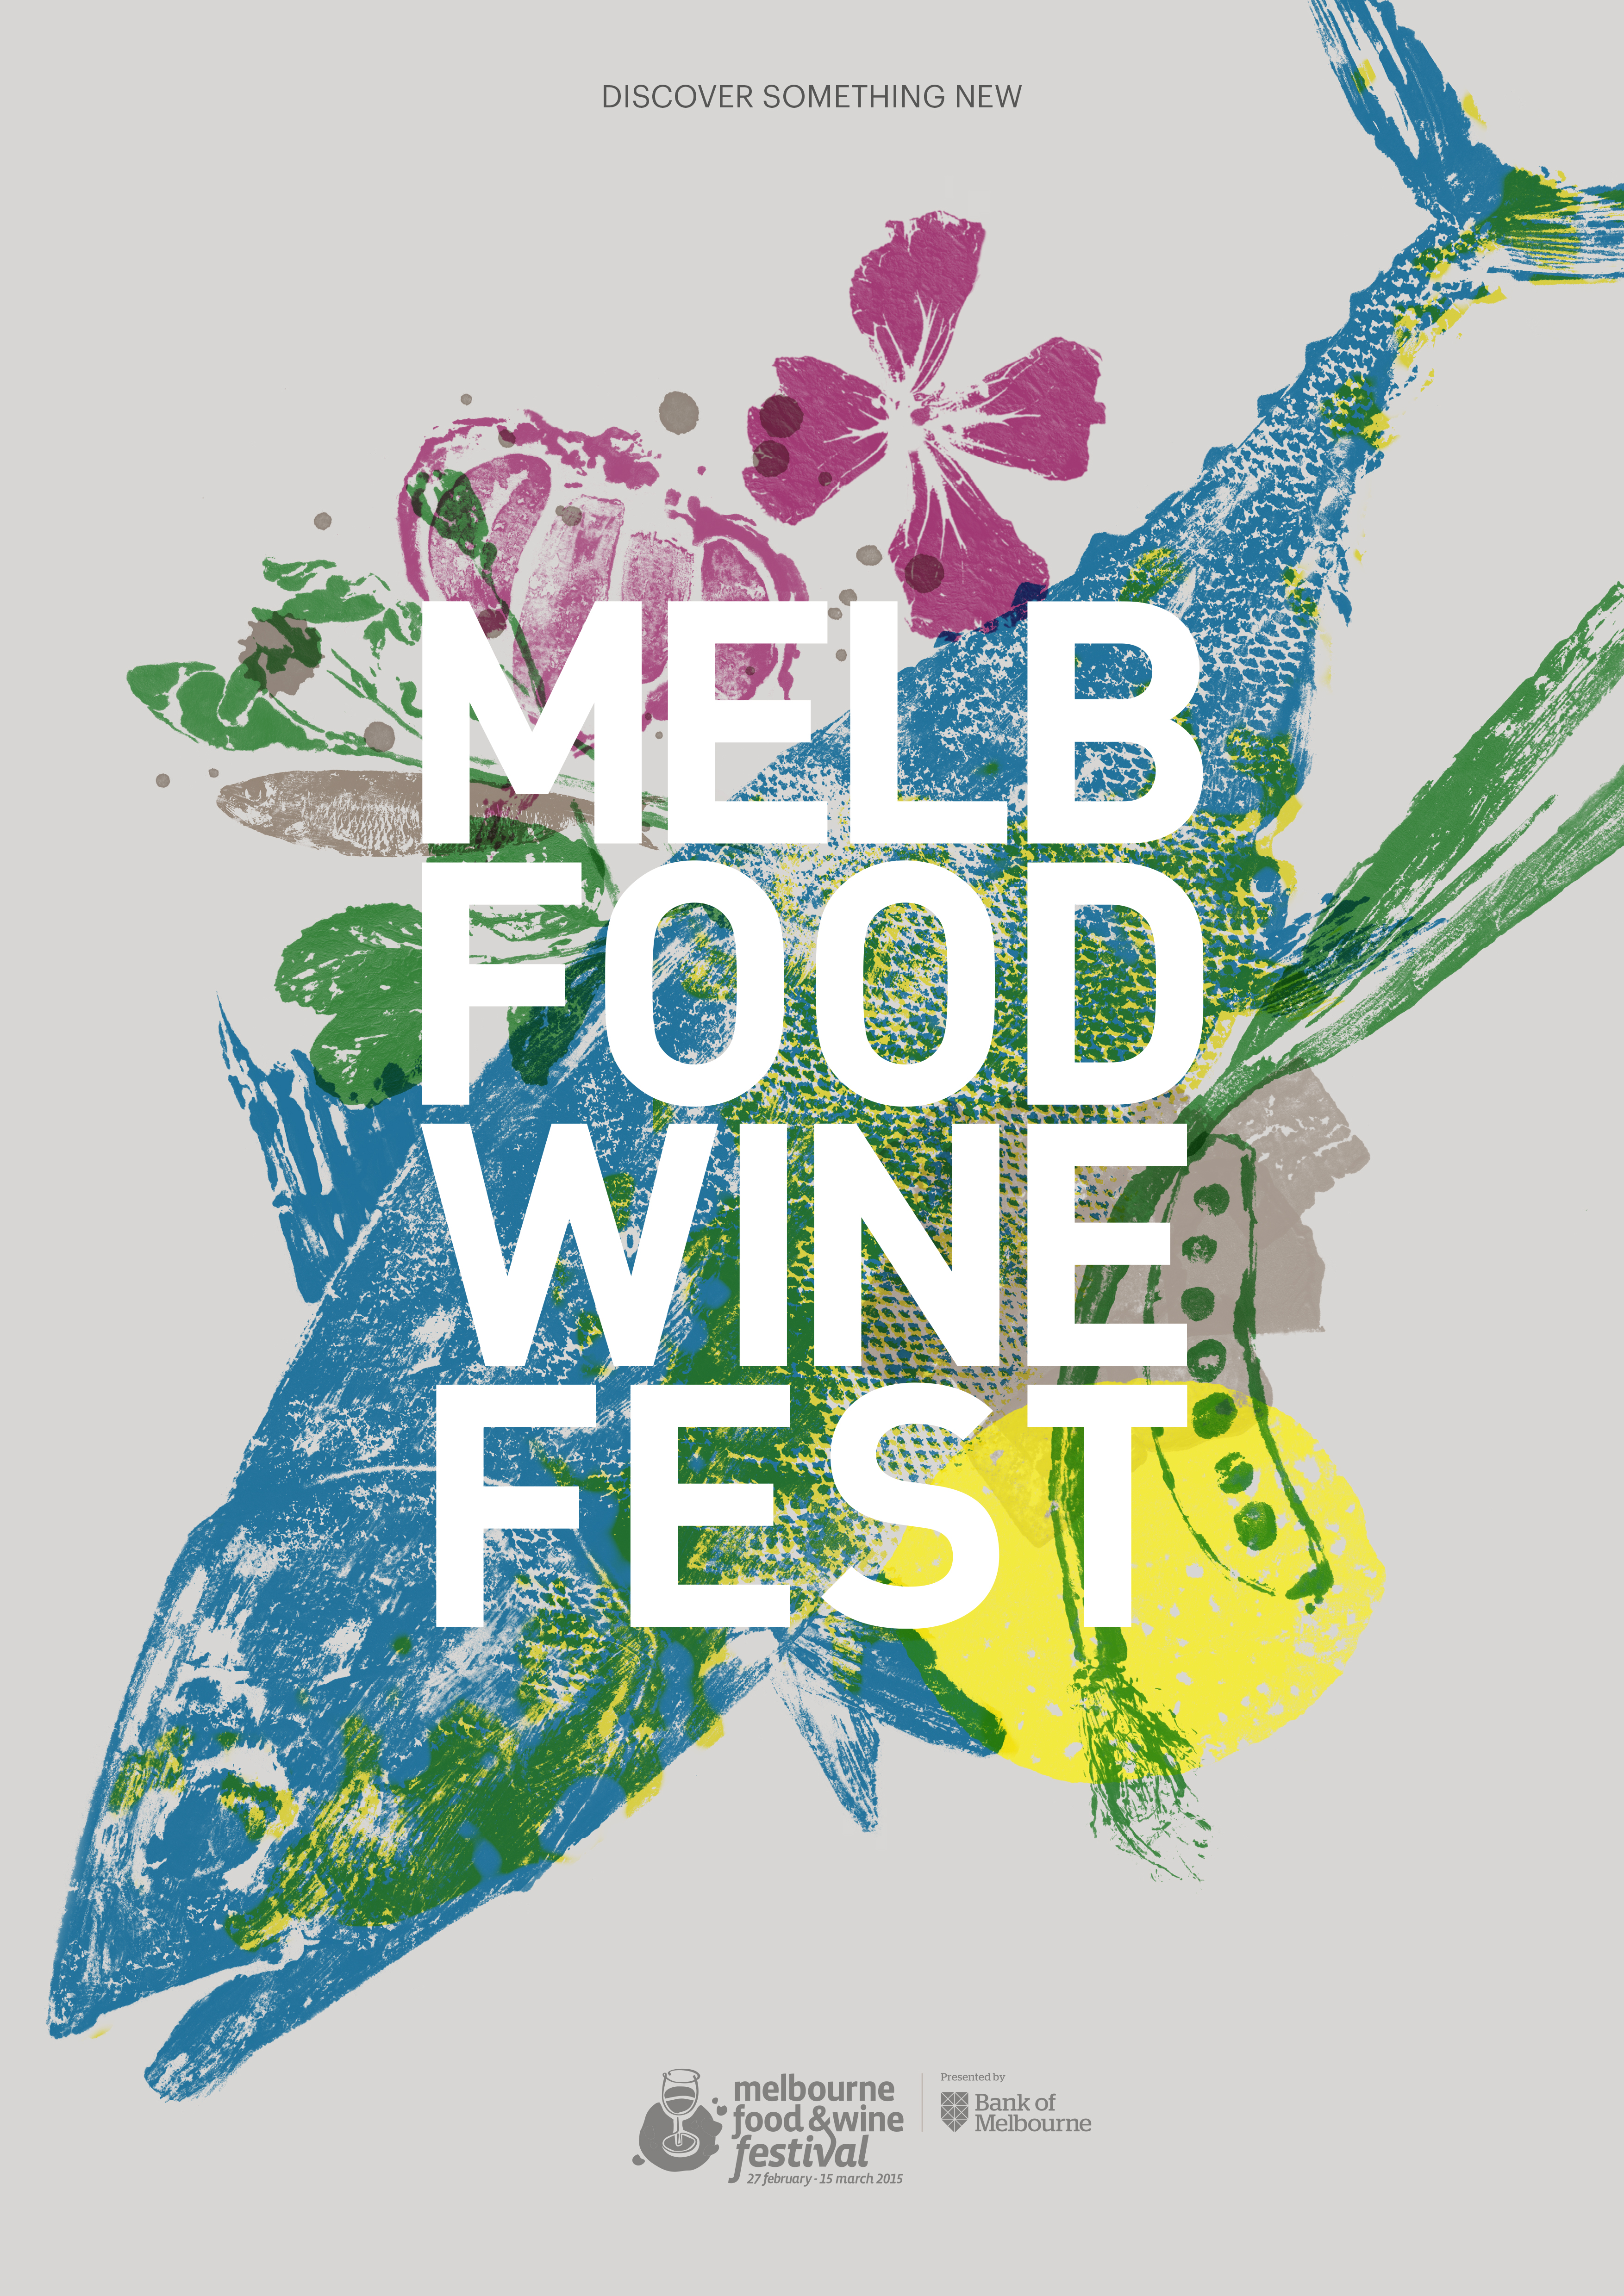 Melbourne Food & Wine Festival turns to animated campaign combining